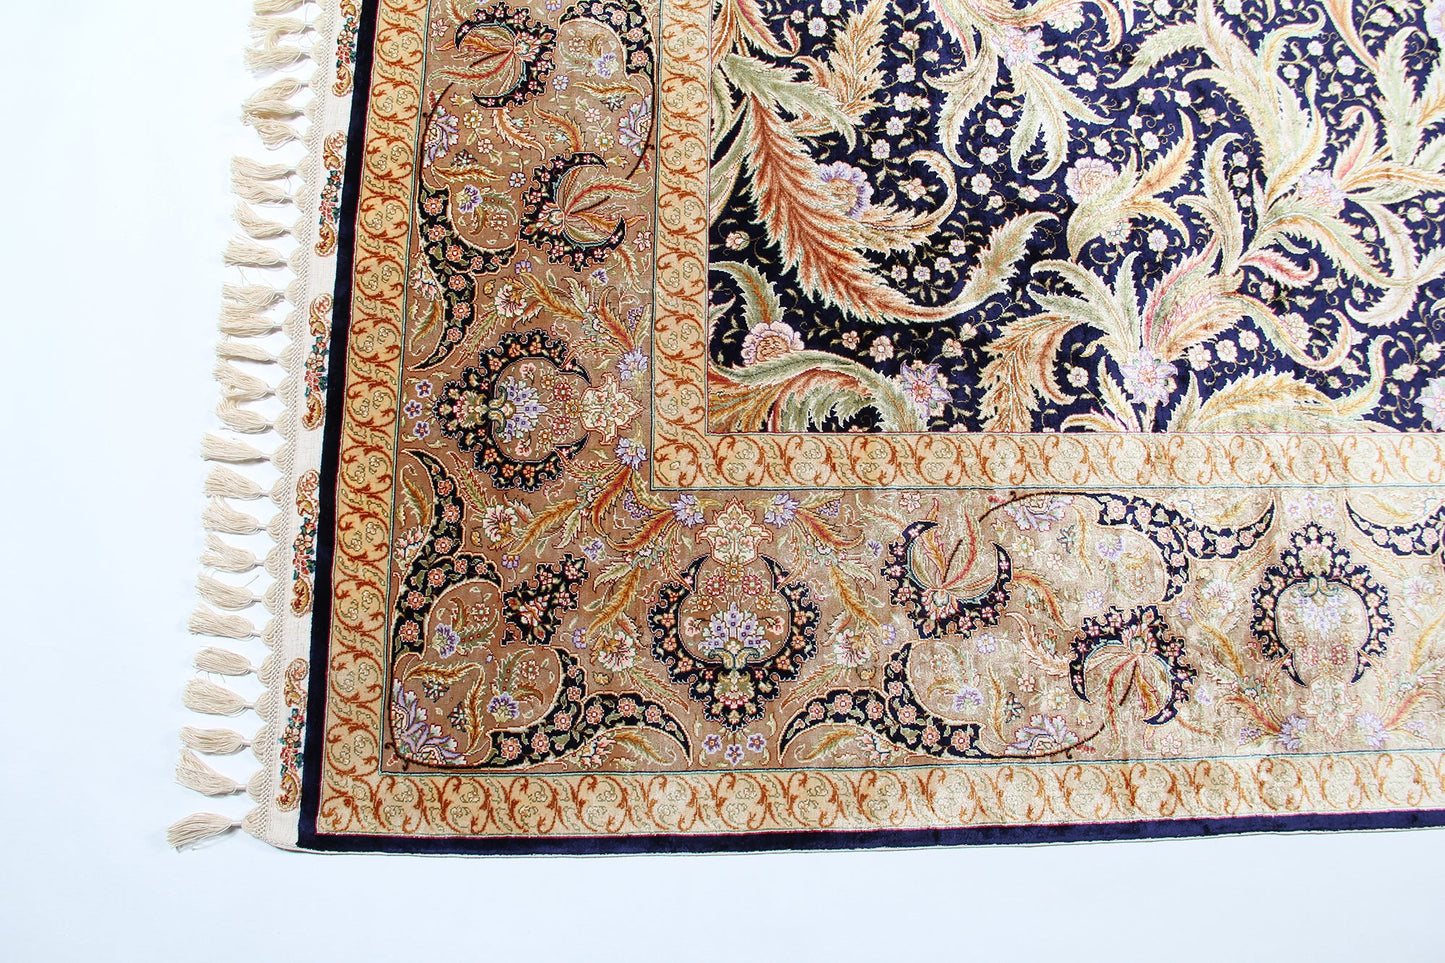 China Traditional Floral Silk Rug With Turkish Pattern And  China  Design product image #27556093001898